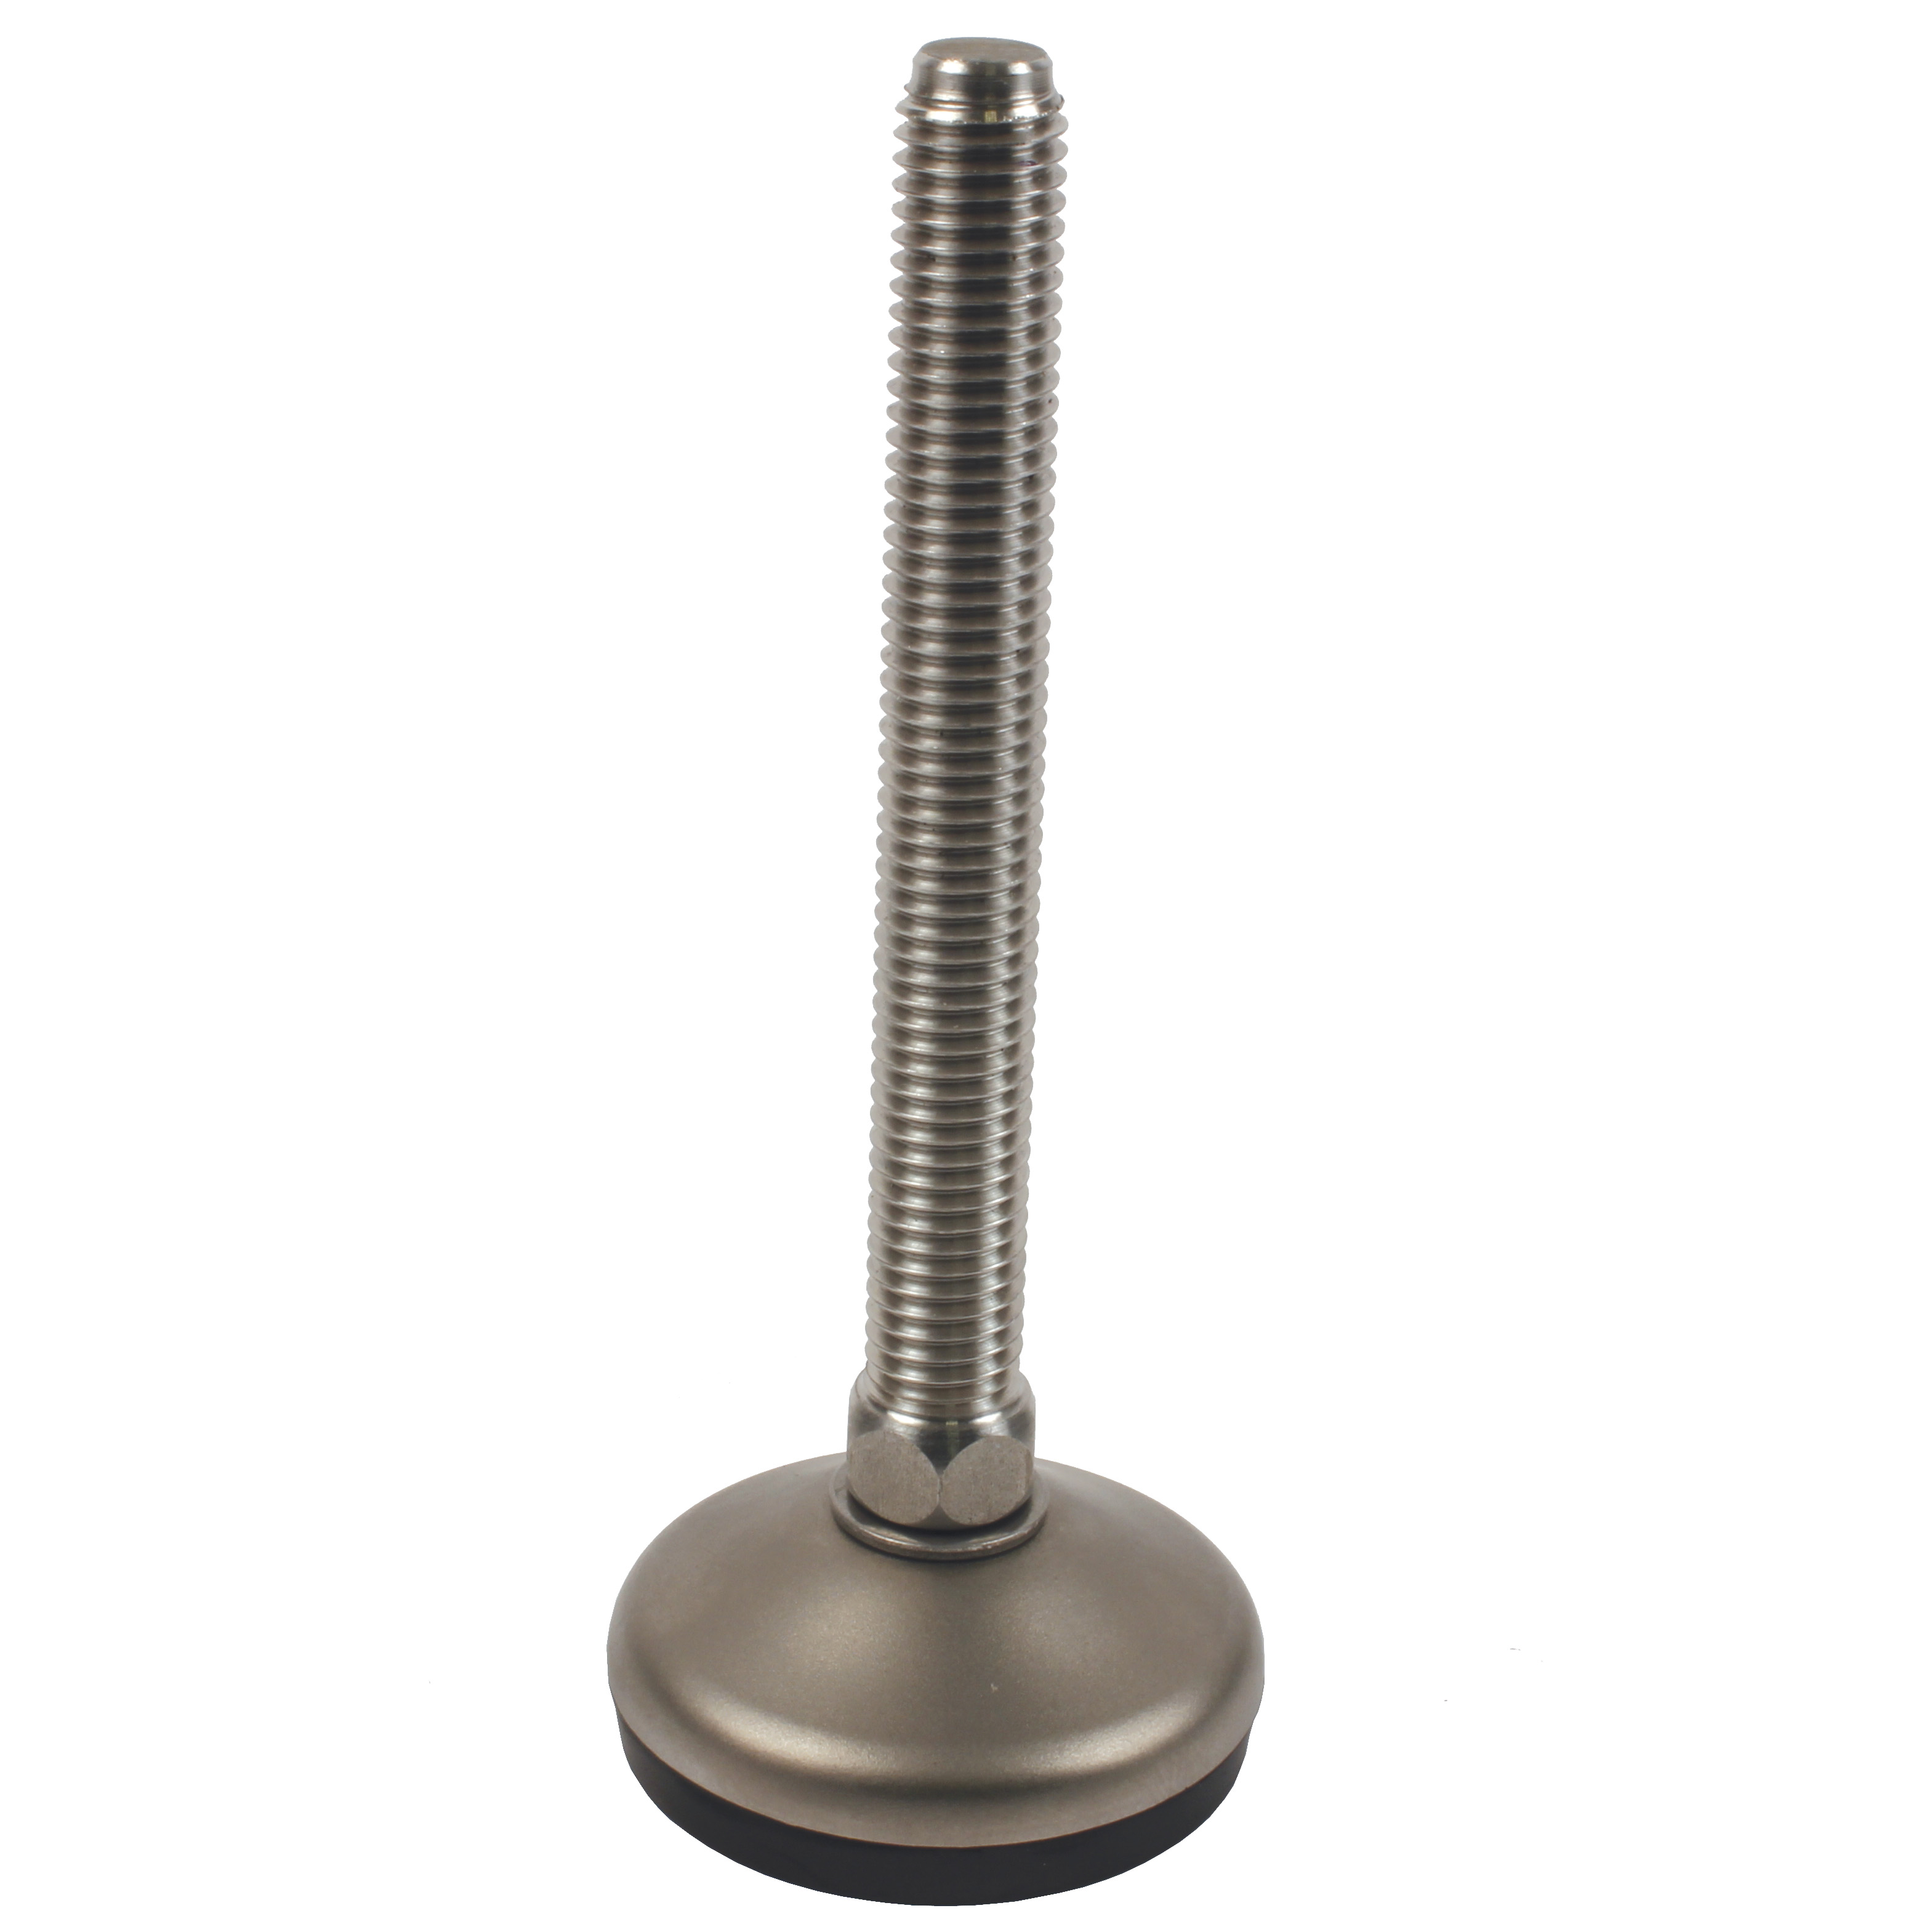 Articulated levelling foot, pressed base Ø50 - Ø 50 - Stainless steel - sanded finish - 